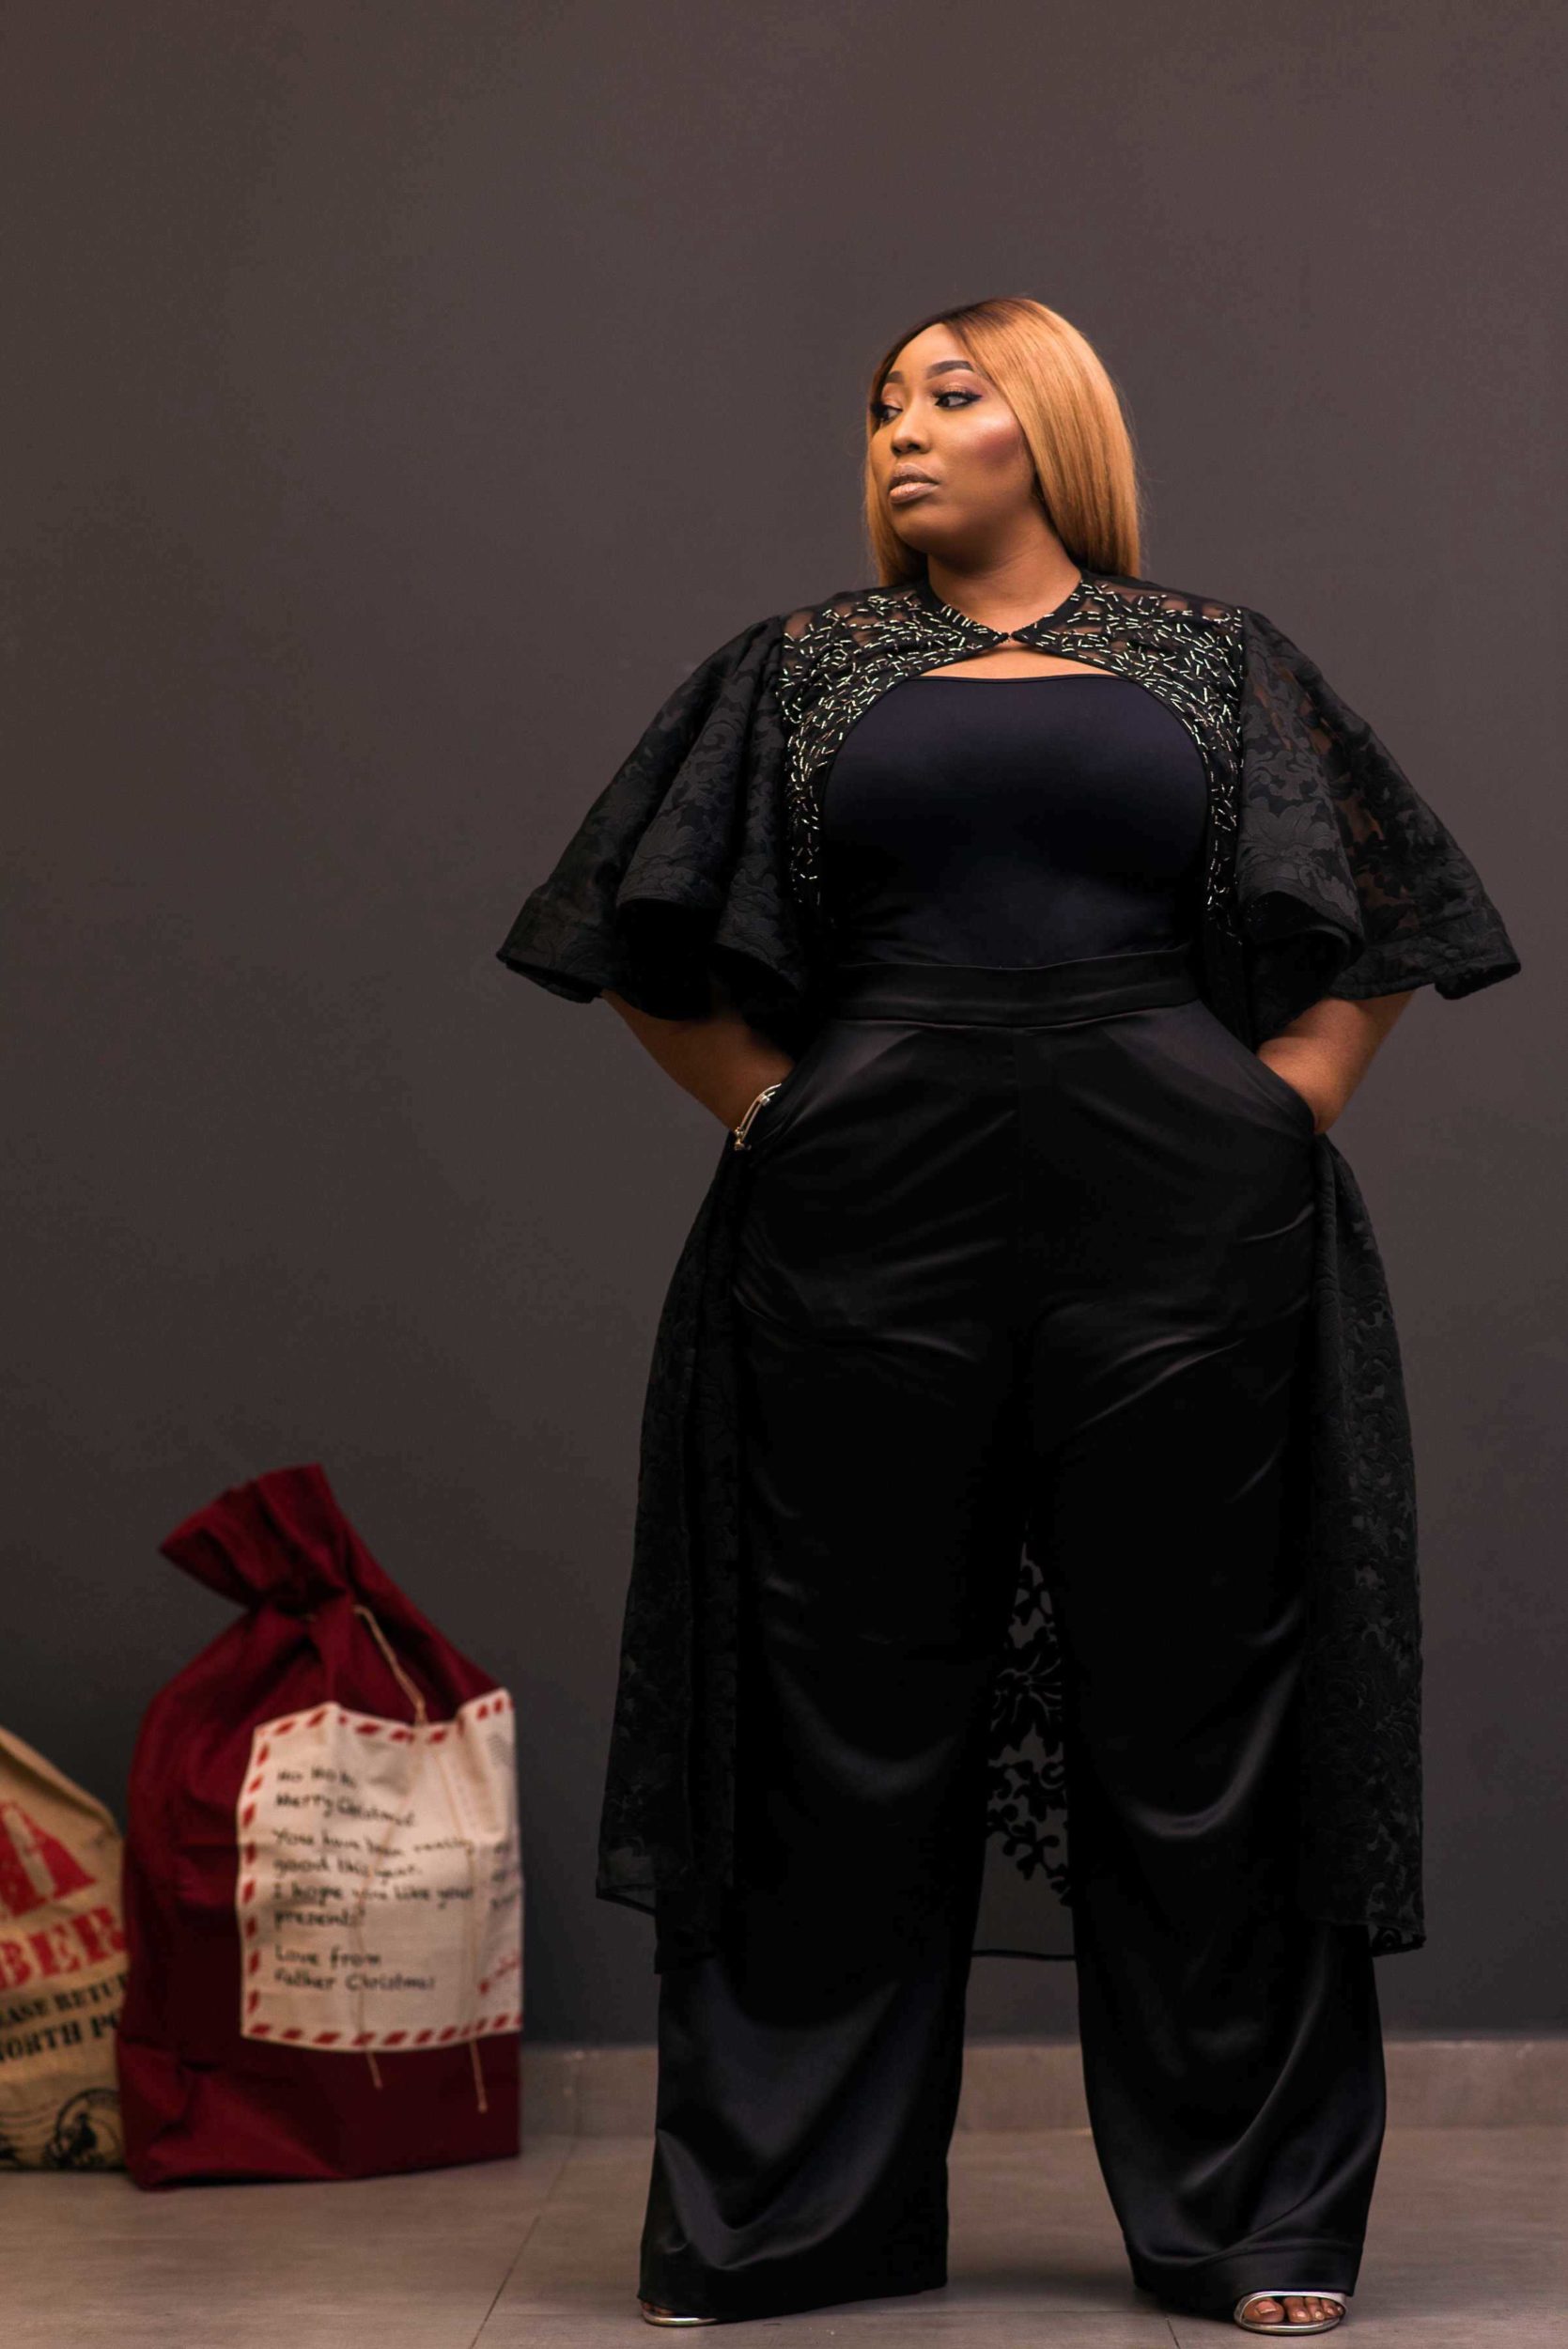 My Q Lady’s Latest Collection Celebrates Women of All Sizes